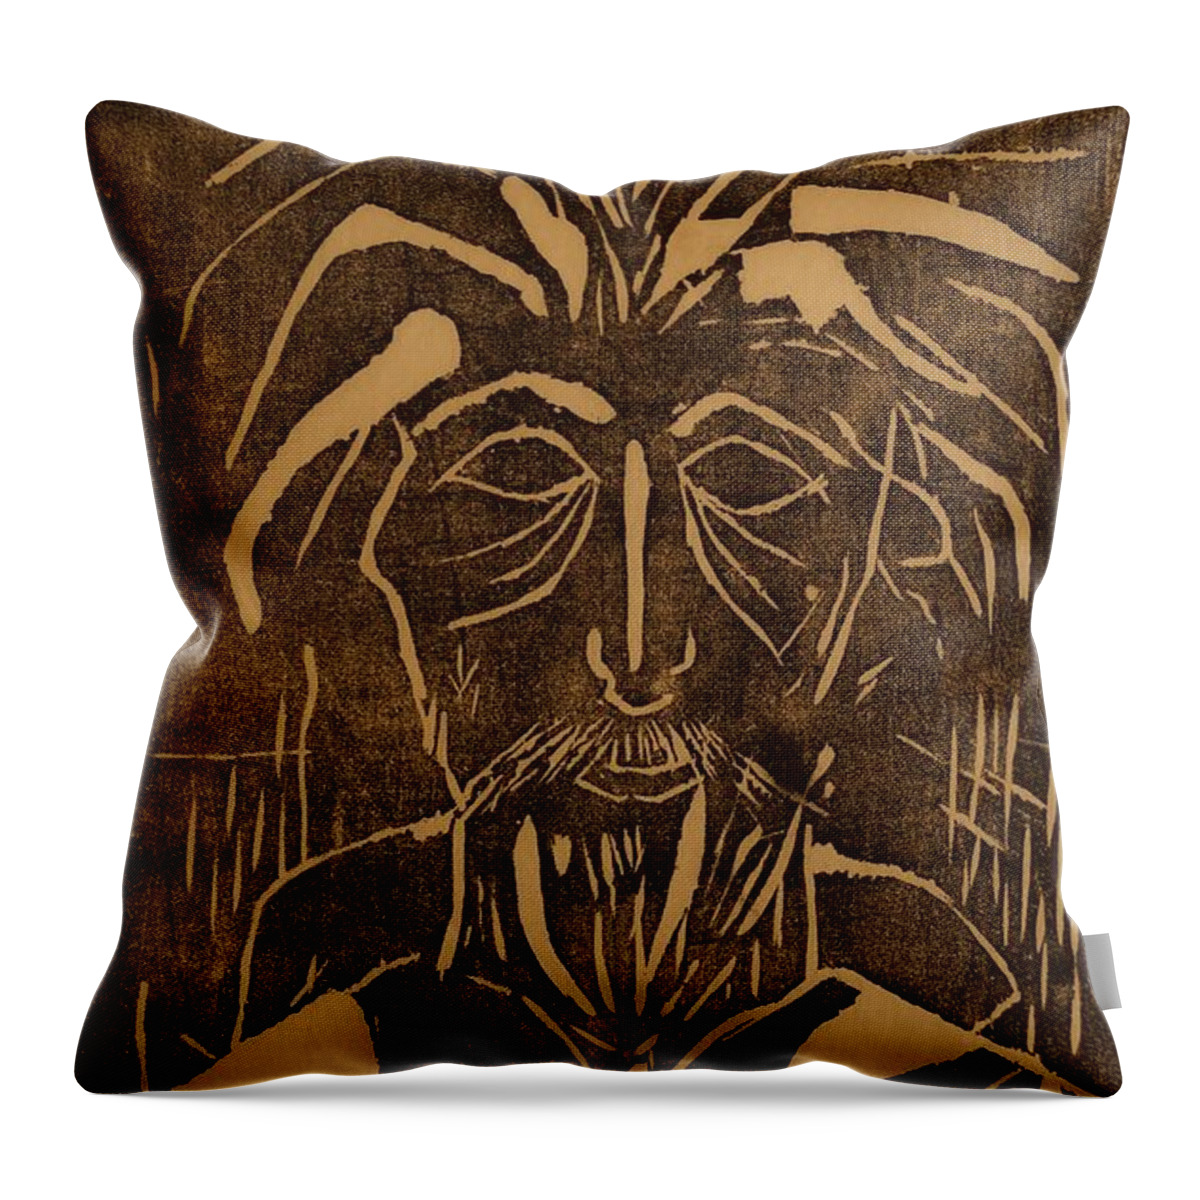 Monk Throw Pillow featuring the painting The Monk by Erika Jean Chamberlin